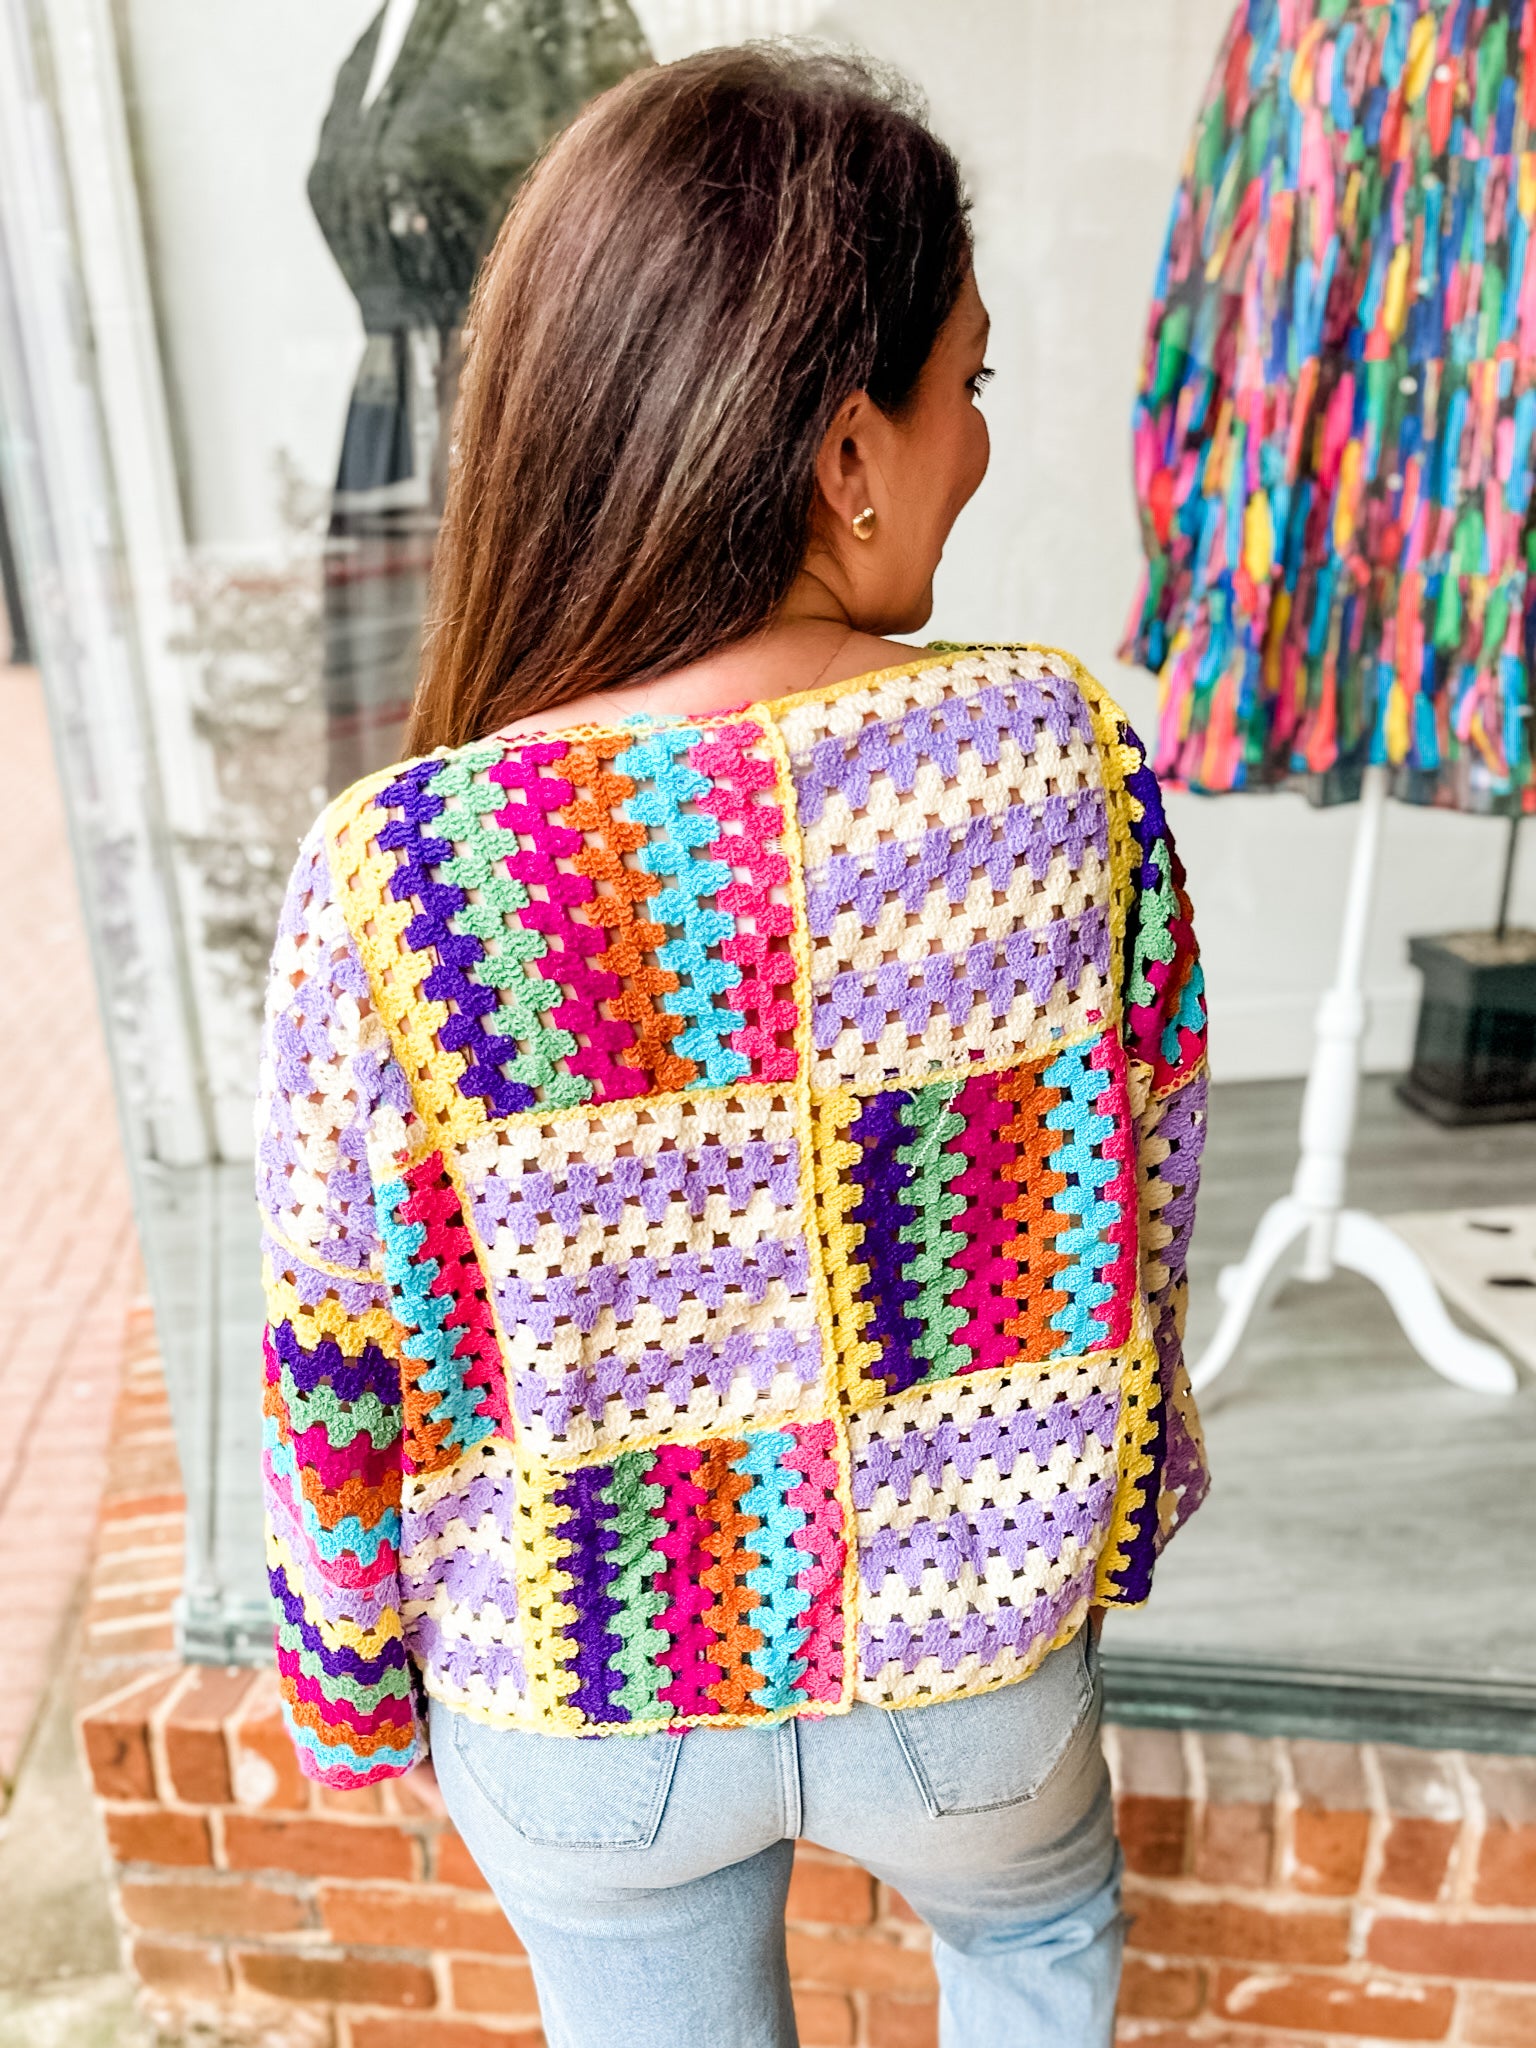 Live Life Colorfully Cardigan Sweater